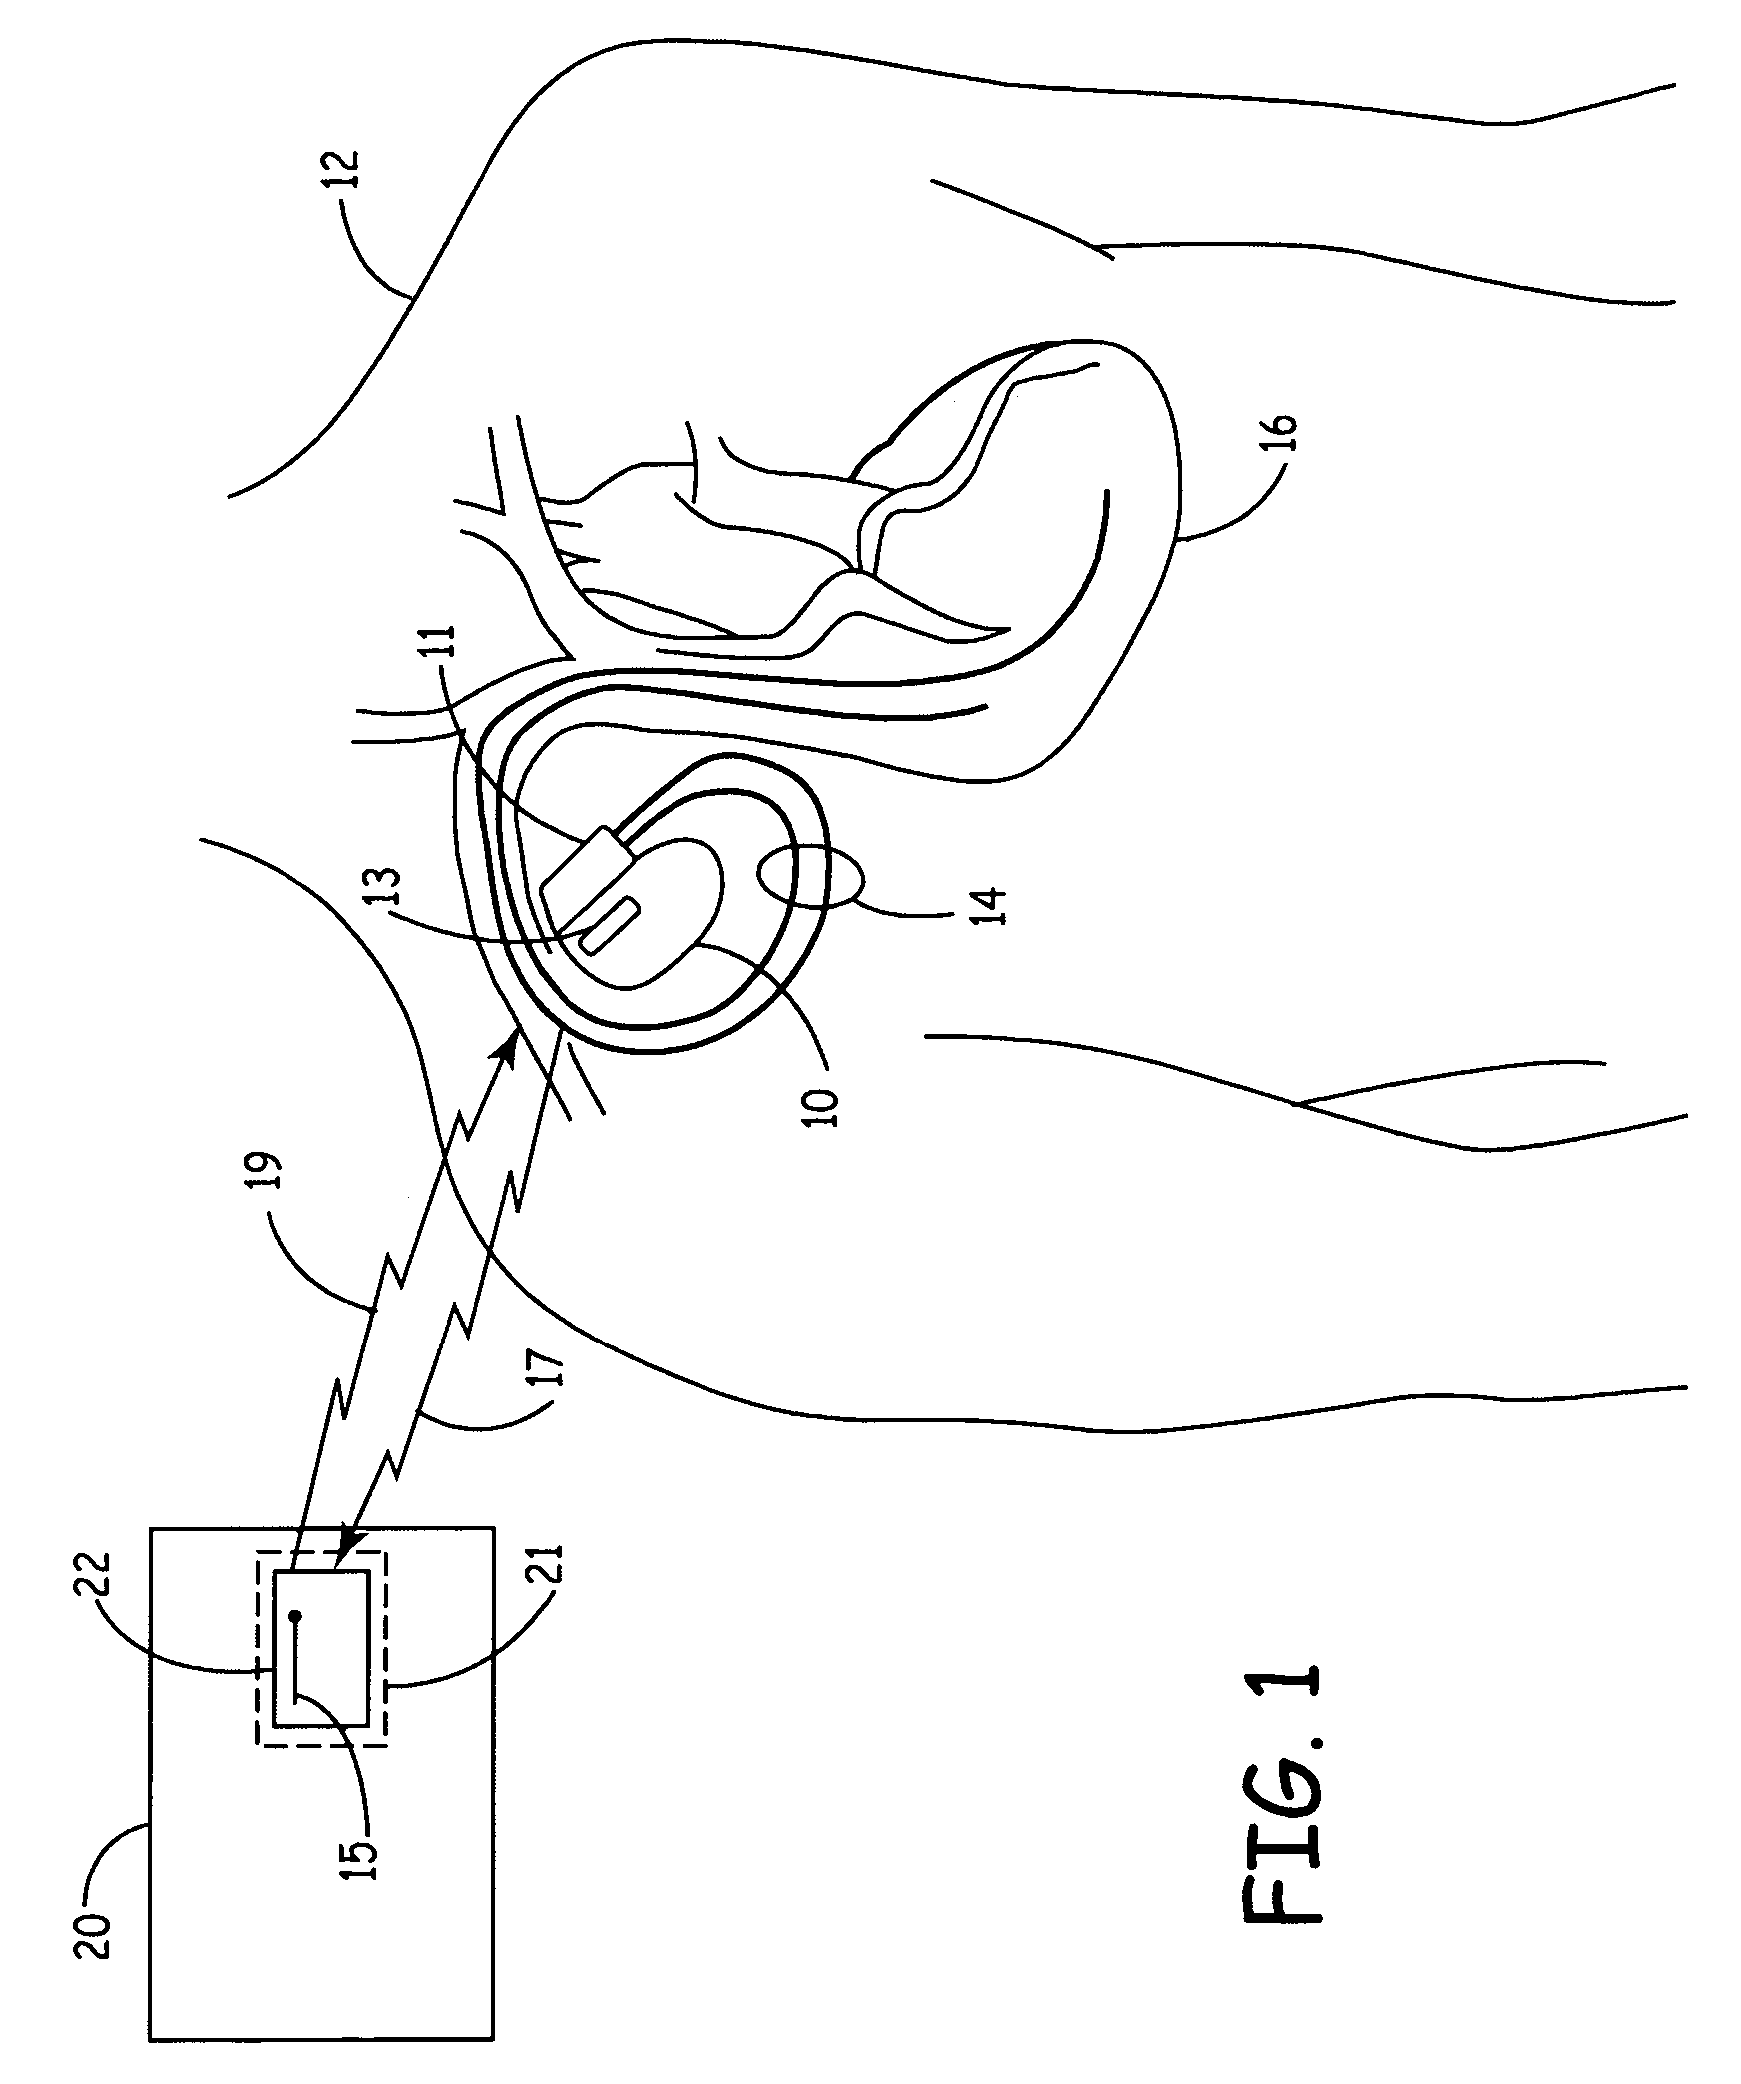 Implantable medical device programmer module for use with existing clinical instrumentation